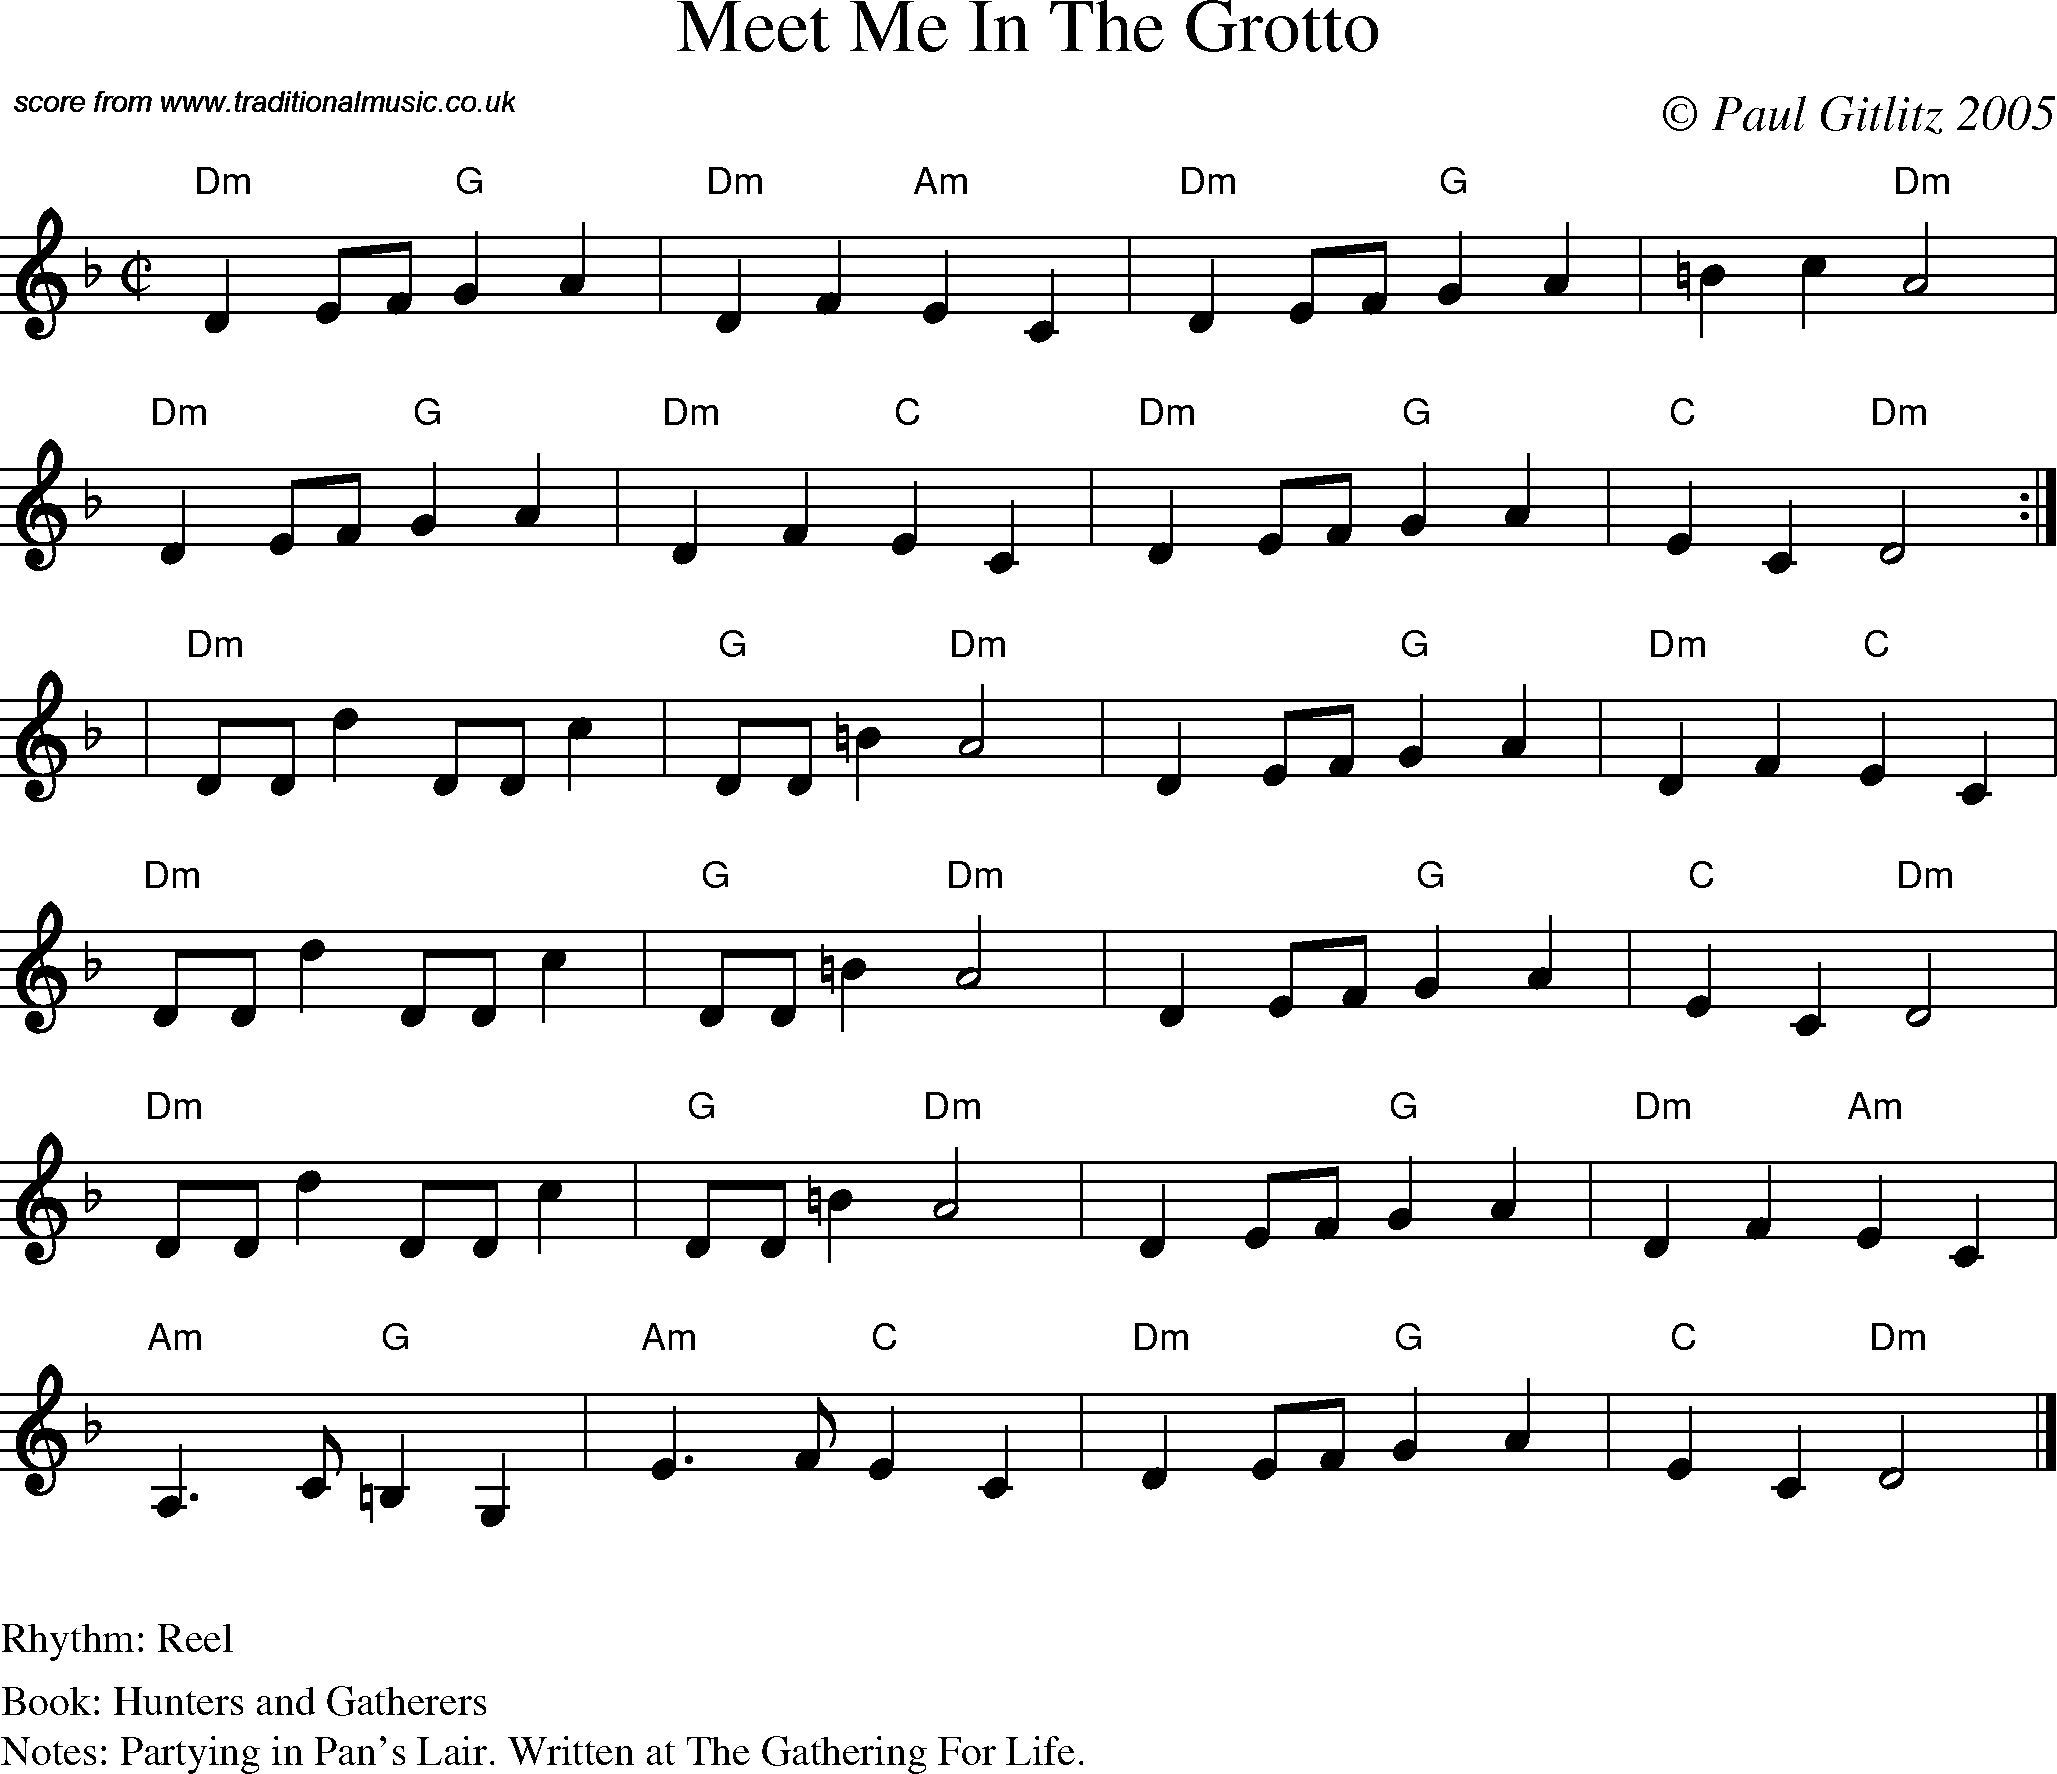 Sheet Music Score for Reel - Meet Me In The Grotto